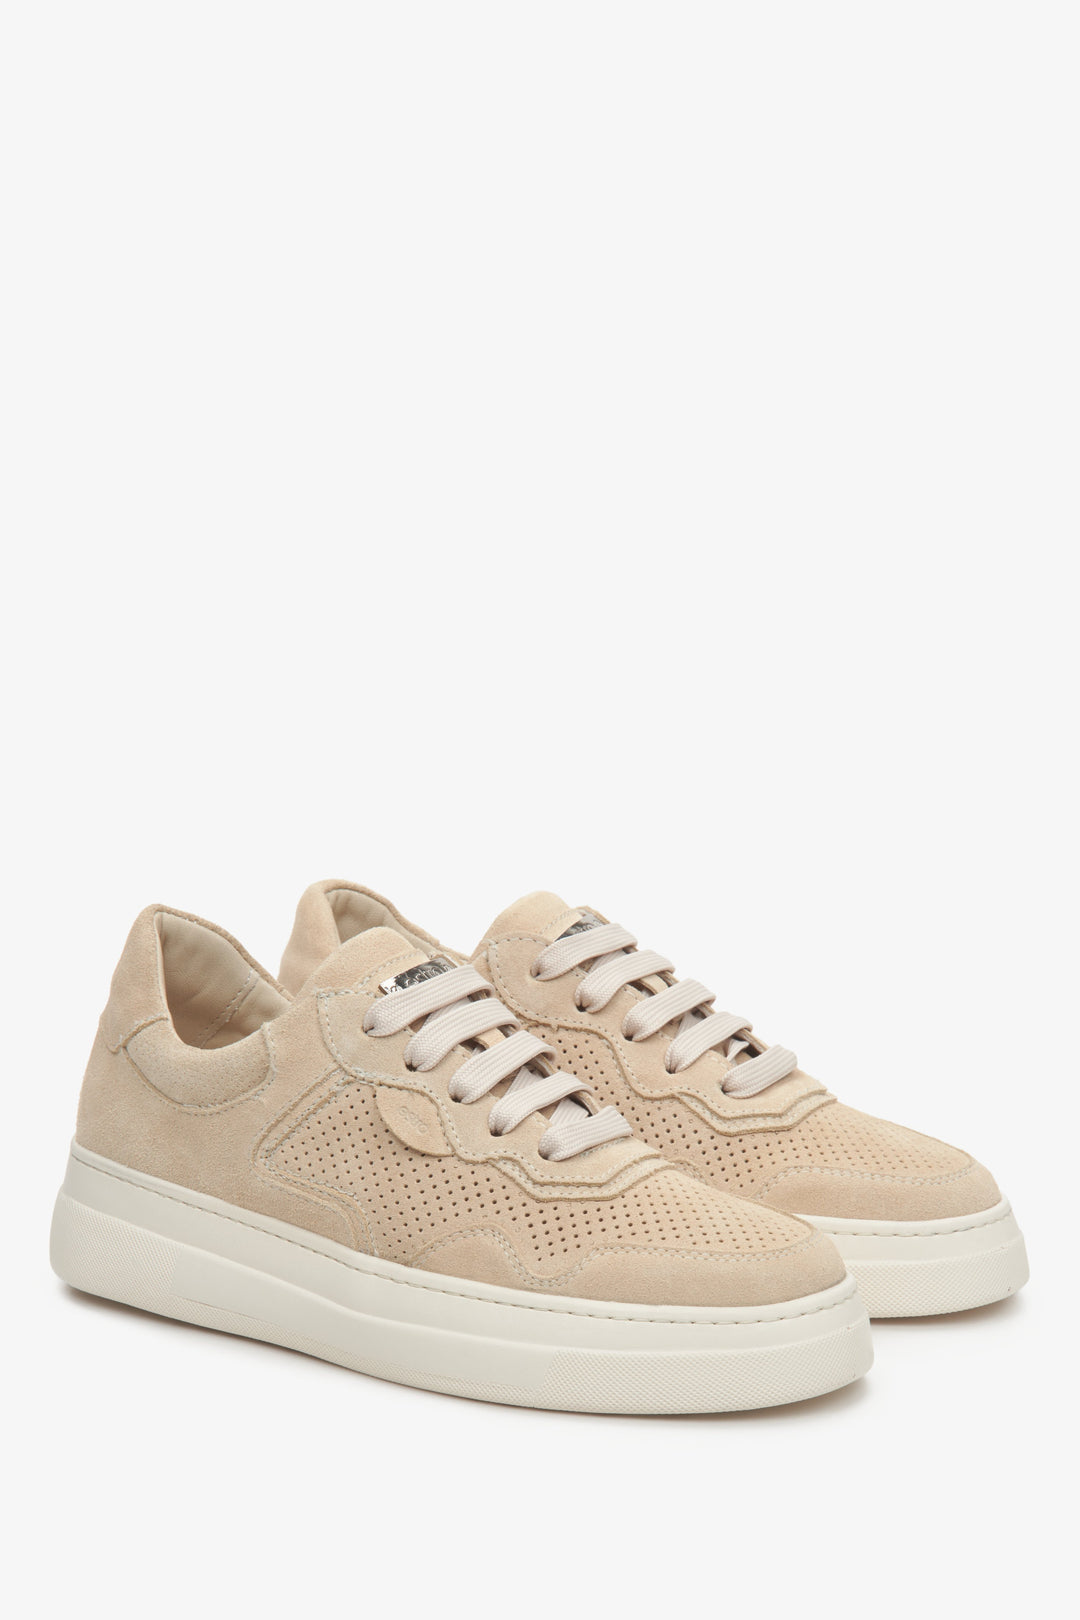 Women's sneakers for summer made of natural suede Estro in light beige color.